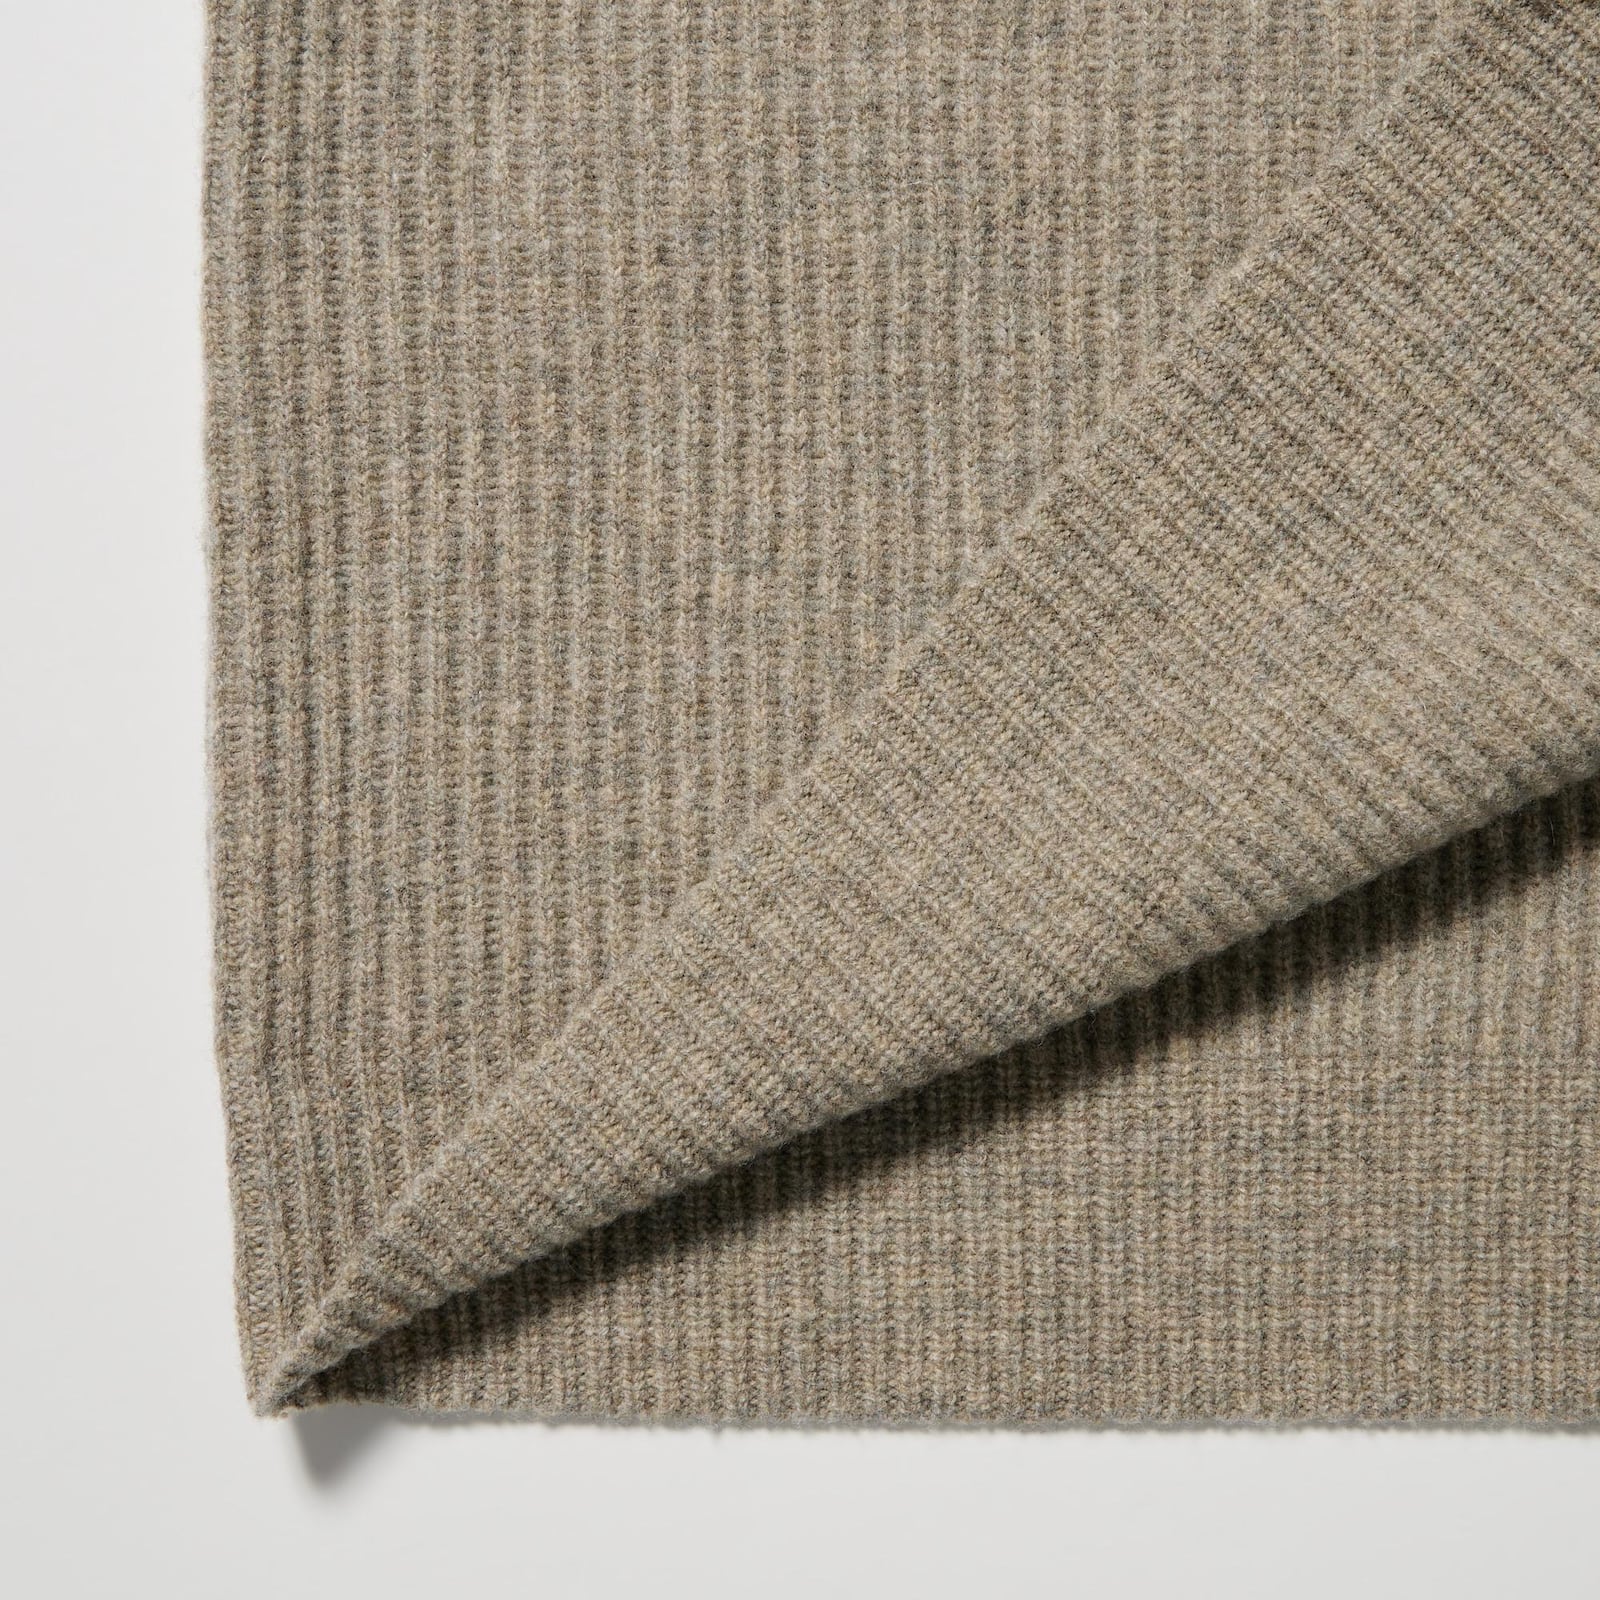 The rhythm of colors and Uniqlo's premium wool fabrics